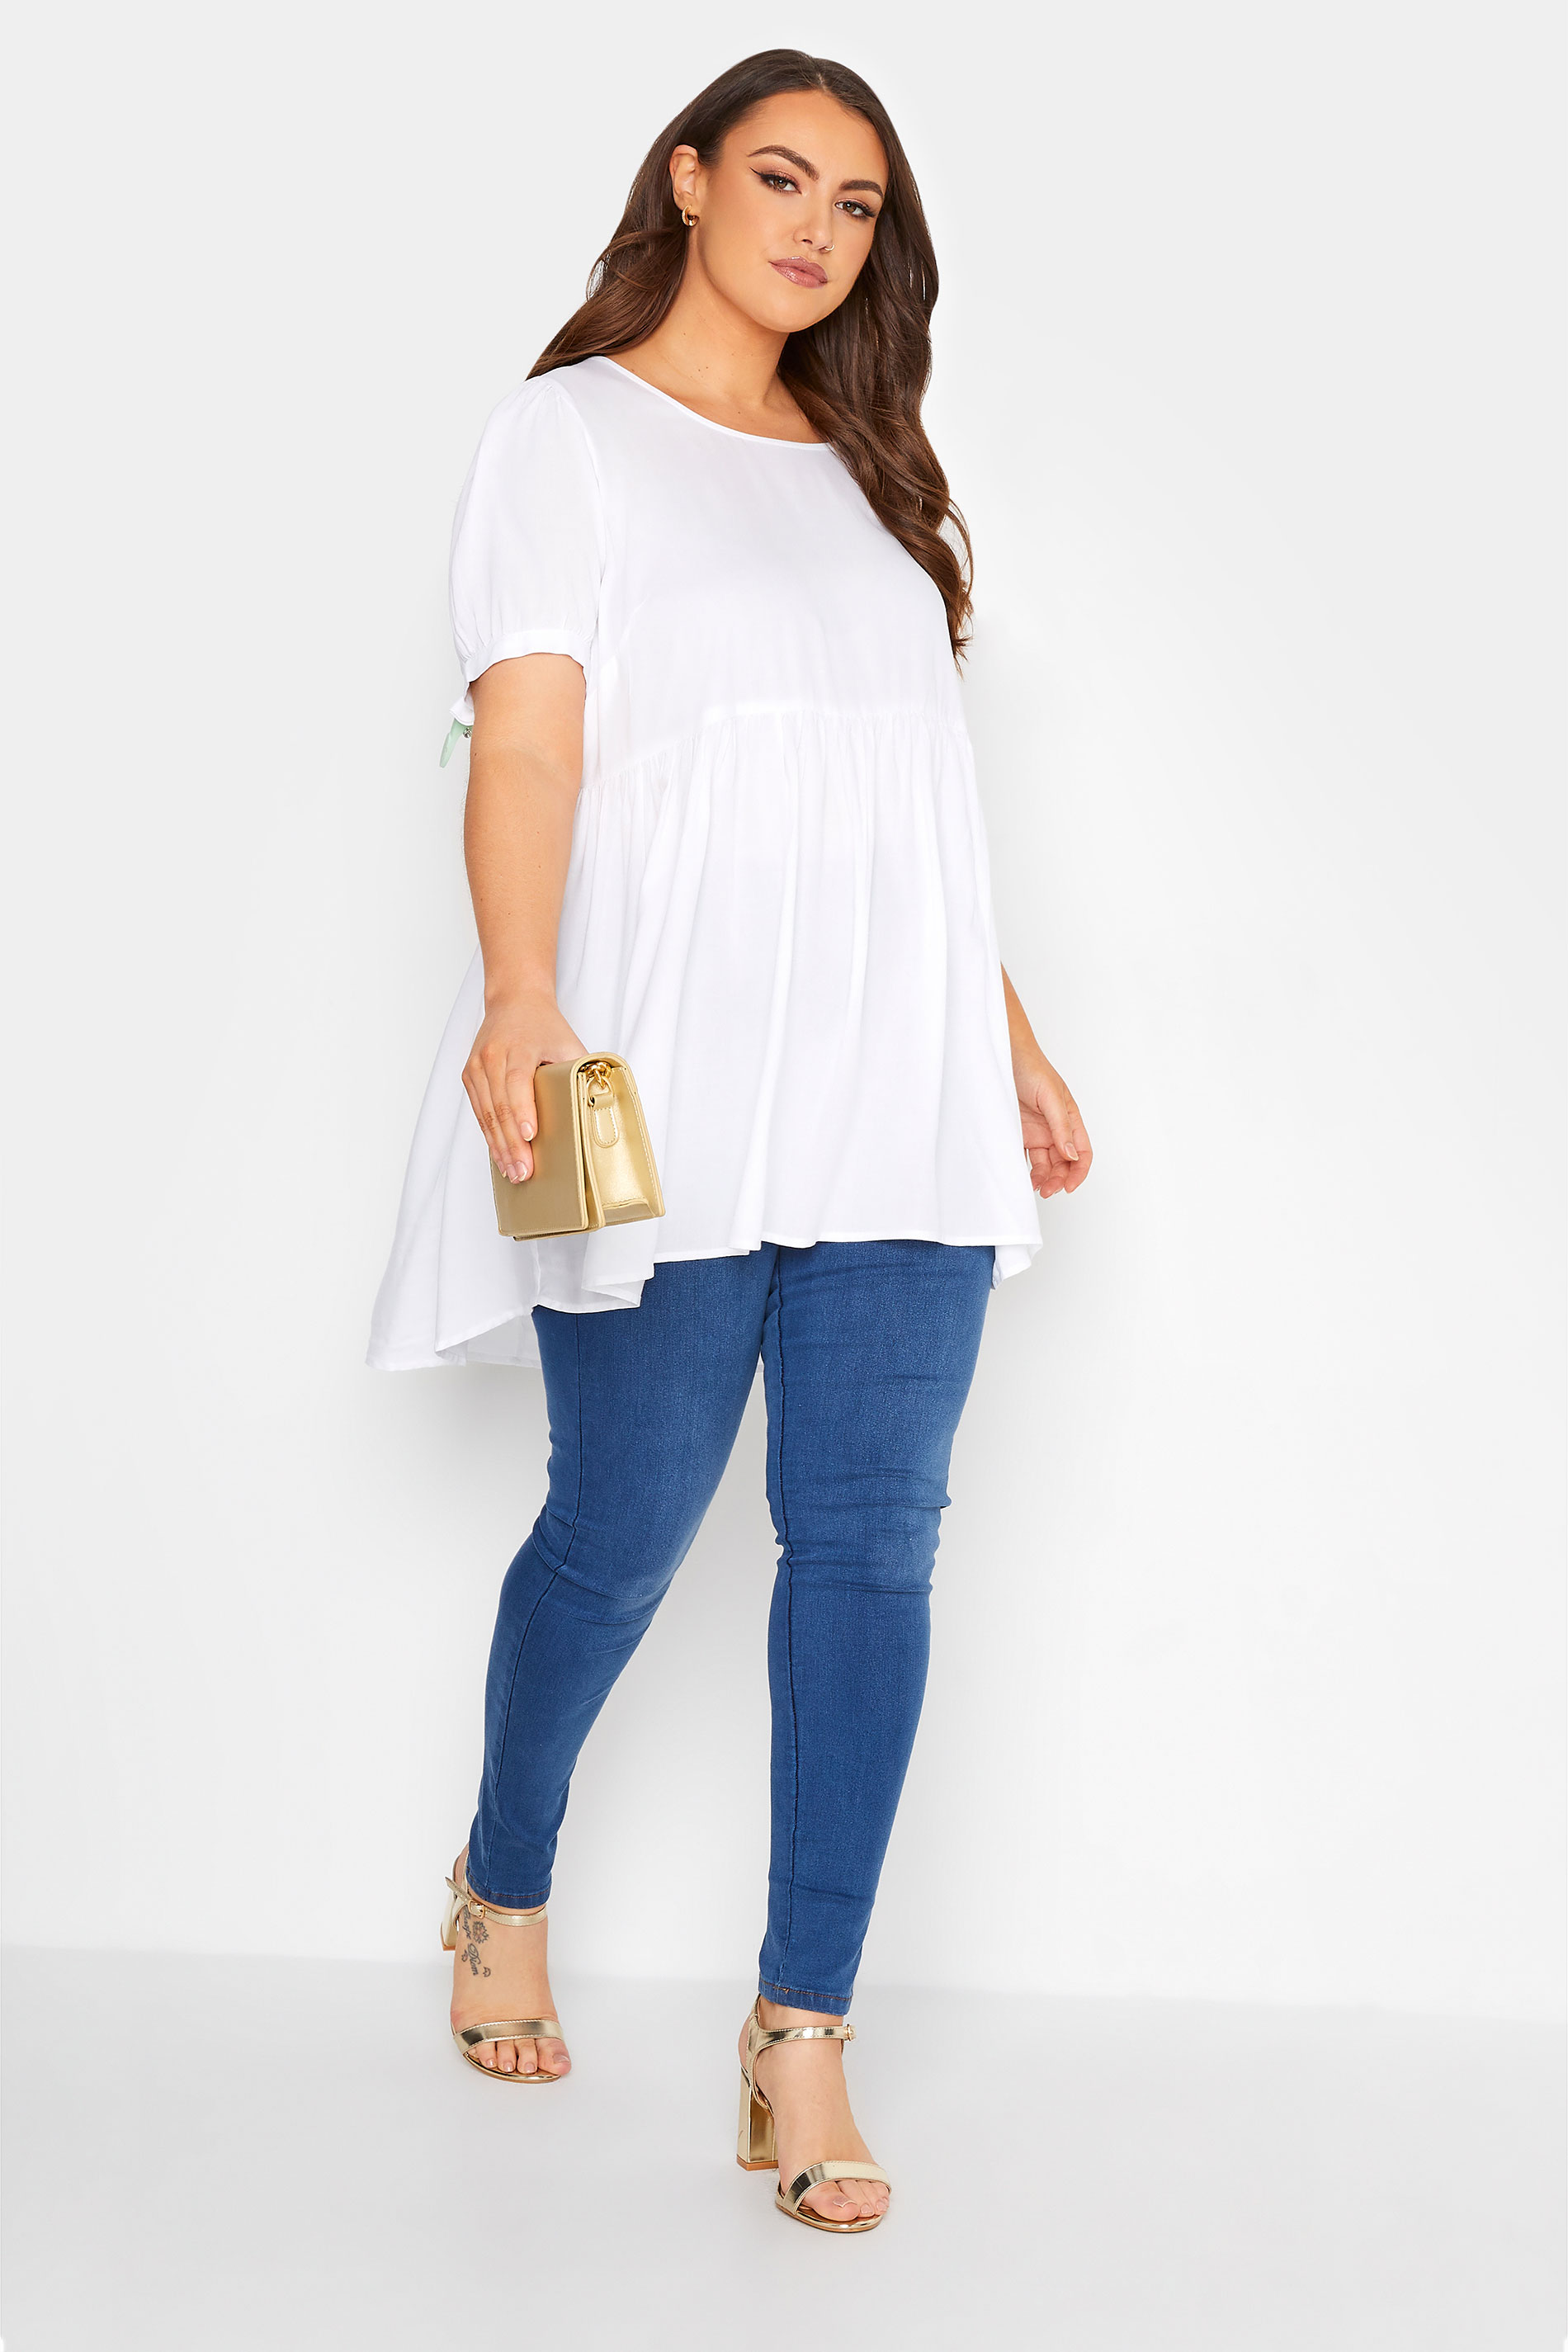 Grande taille  Tops Grande taille  Tops Casual | Top Blanc Smocké Manches Courtes Bouffantes - YL94352